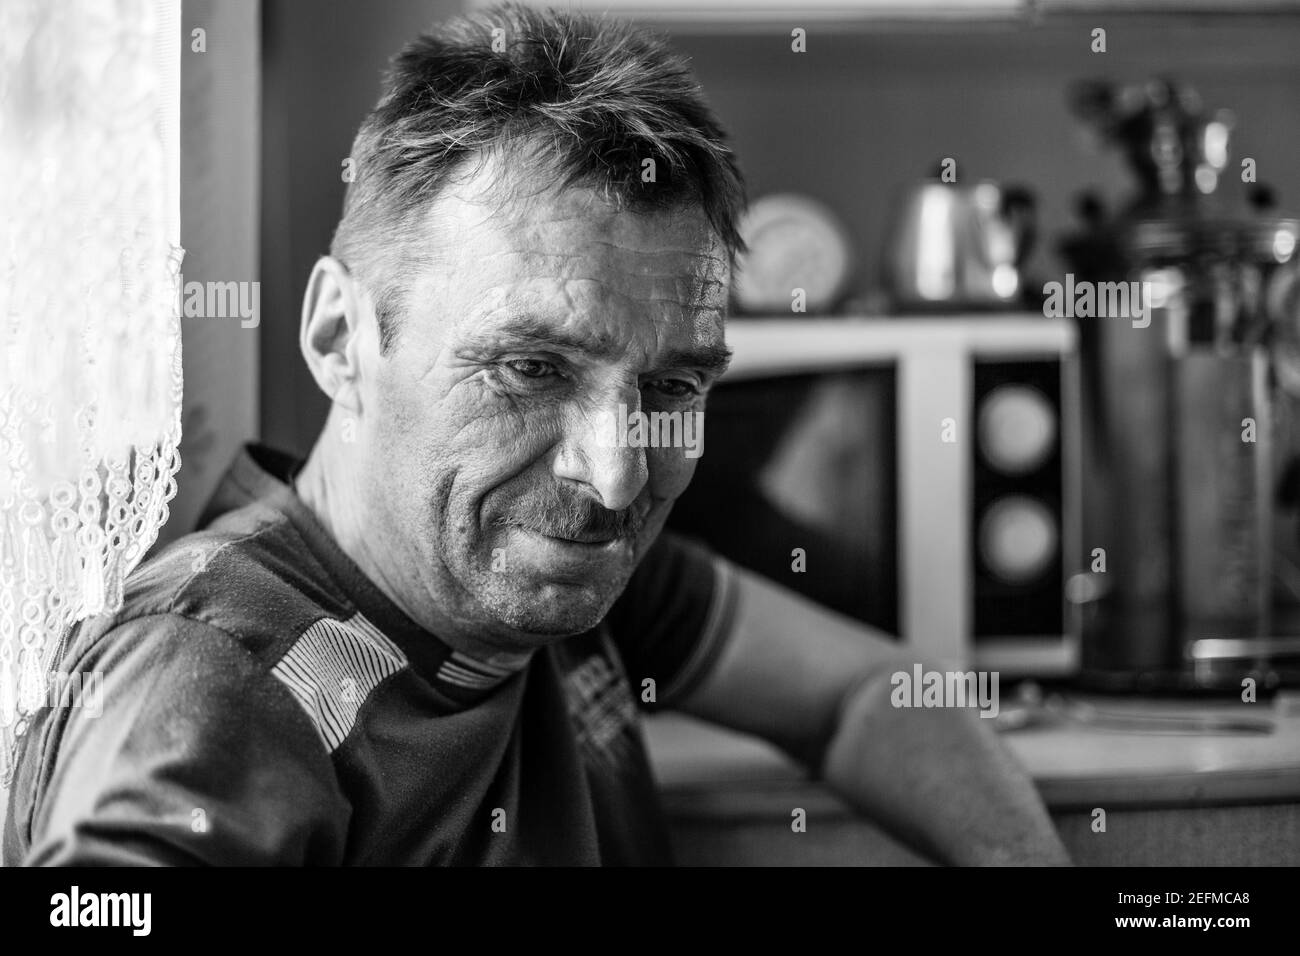 A man farmer in his rural home. Black and white photo. Stock Photo